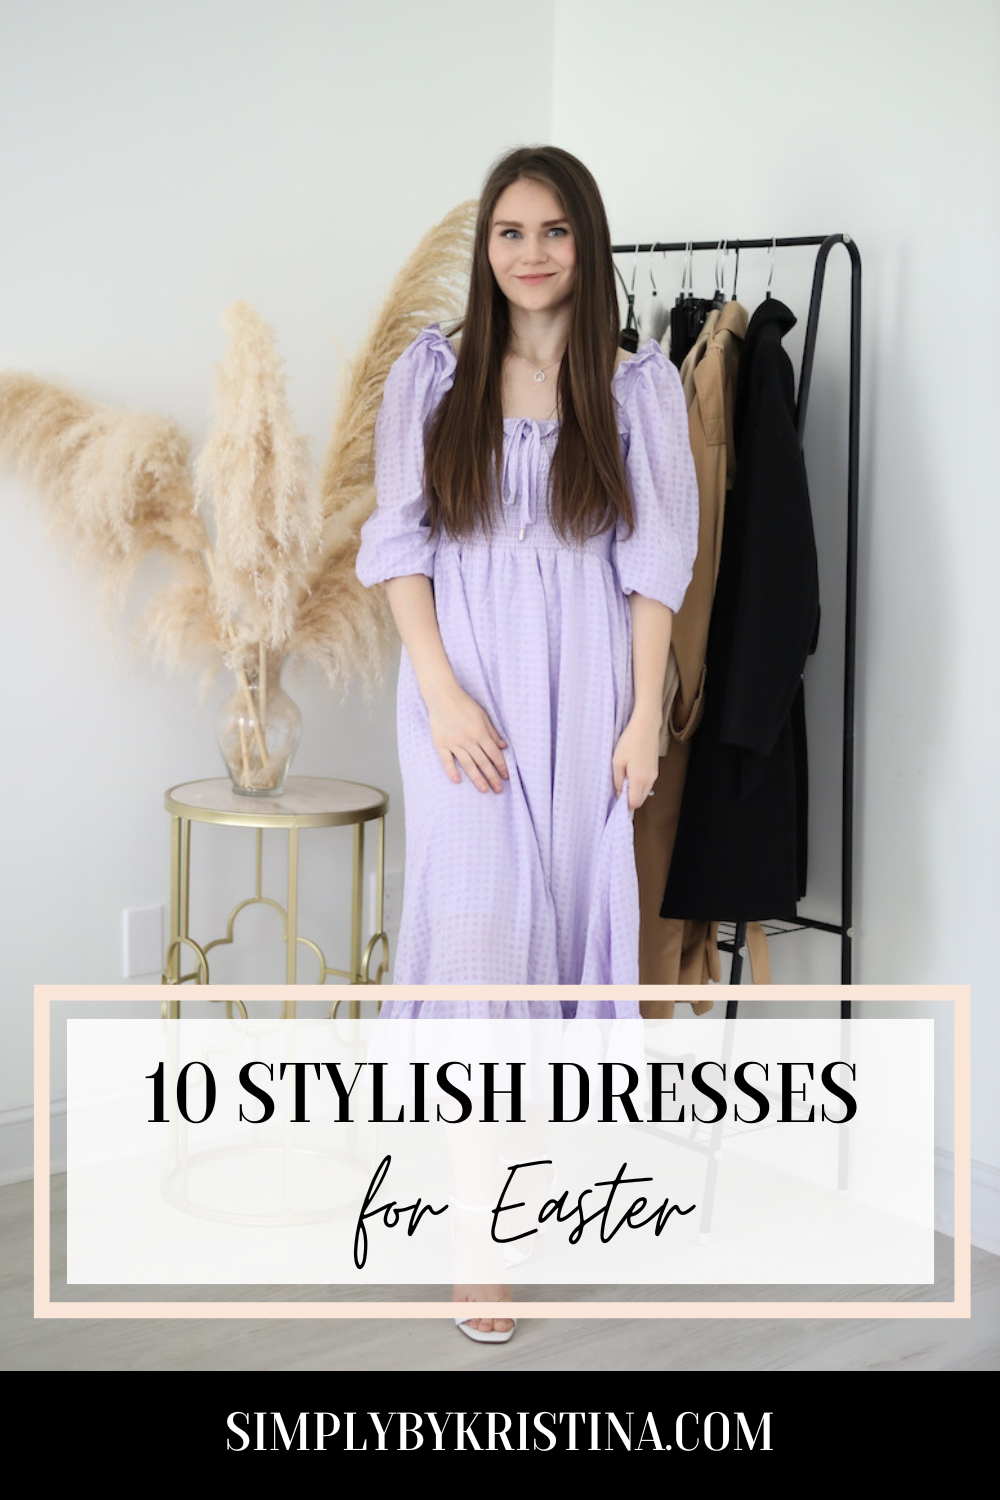 10 Most Modest Dresses To Wear For Easter Sunday